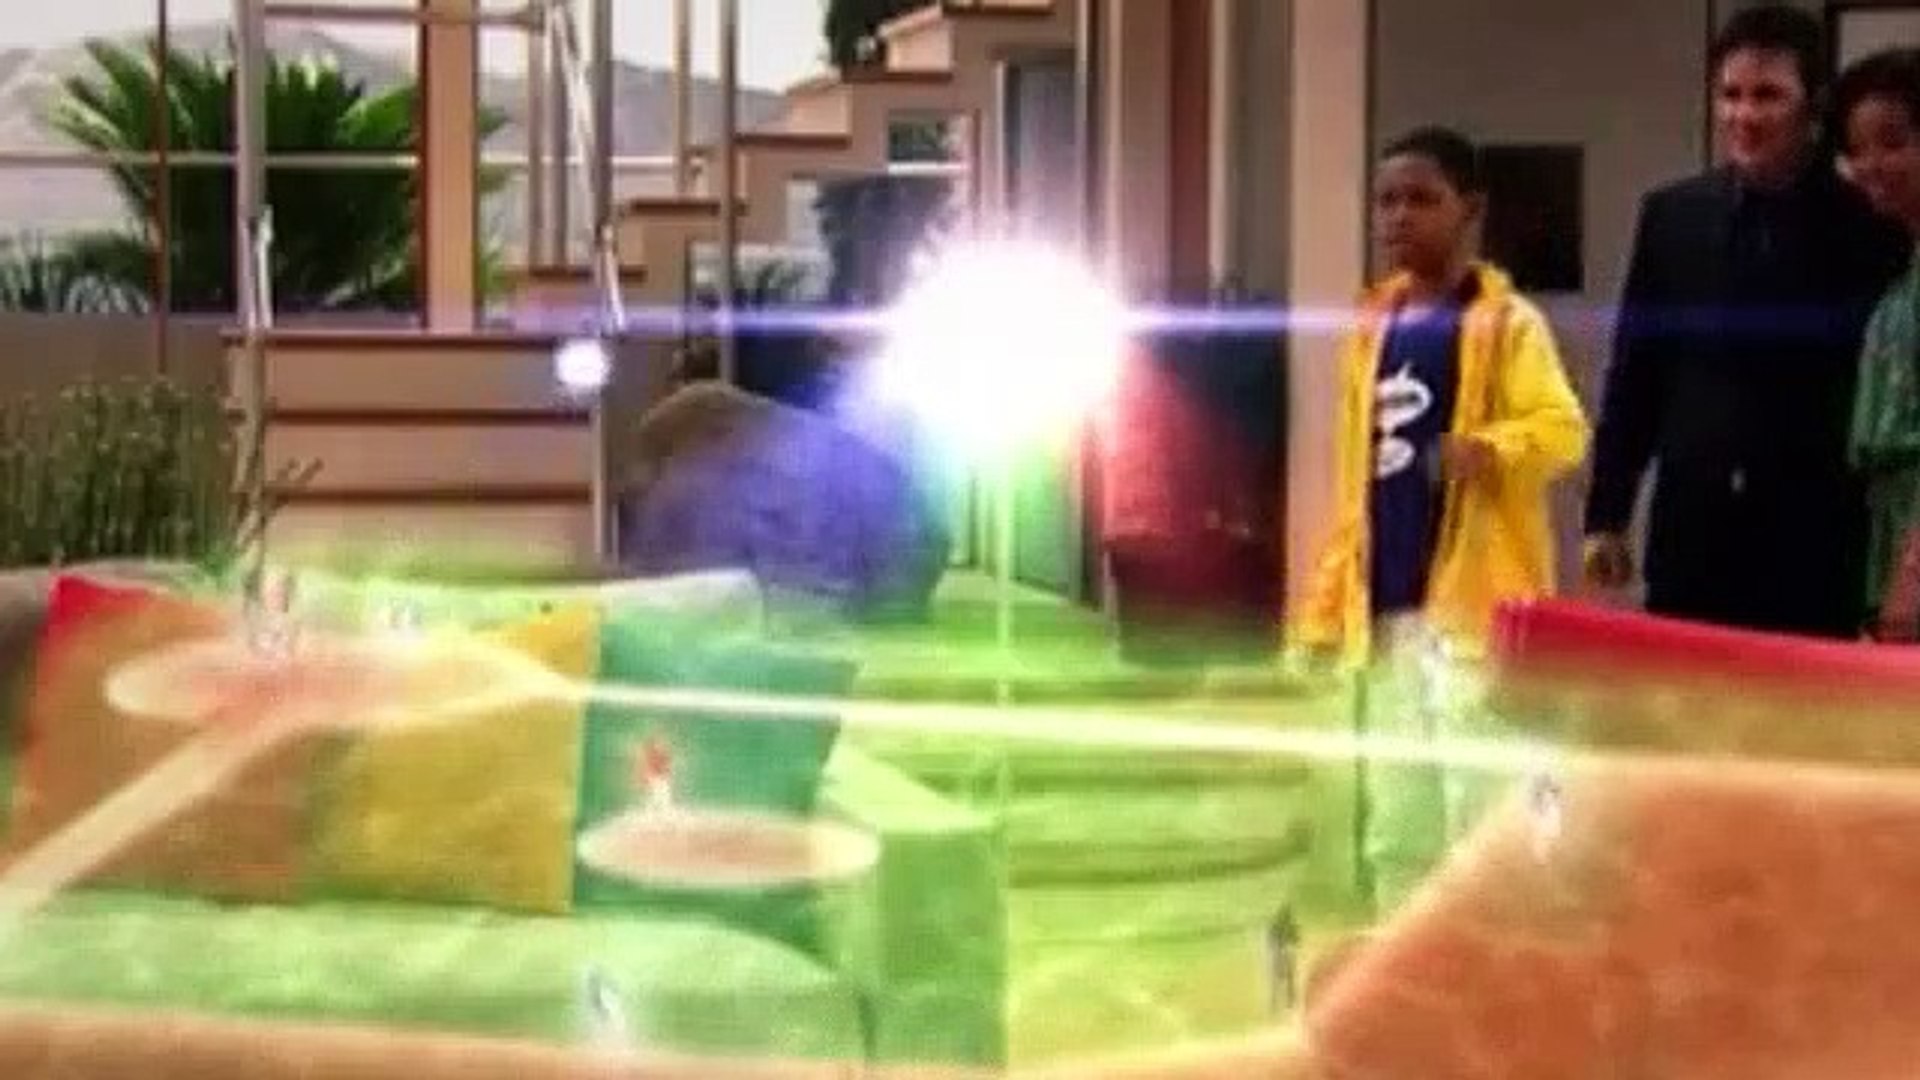 Lab Rats S01E01 Crush, Chop And Burn - video Dailymotion